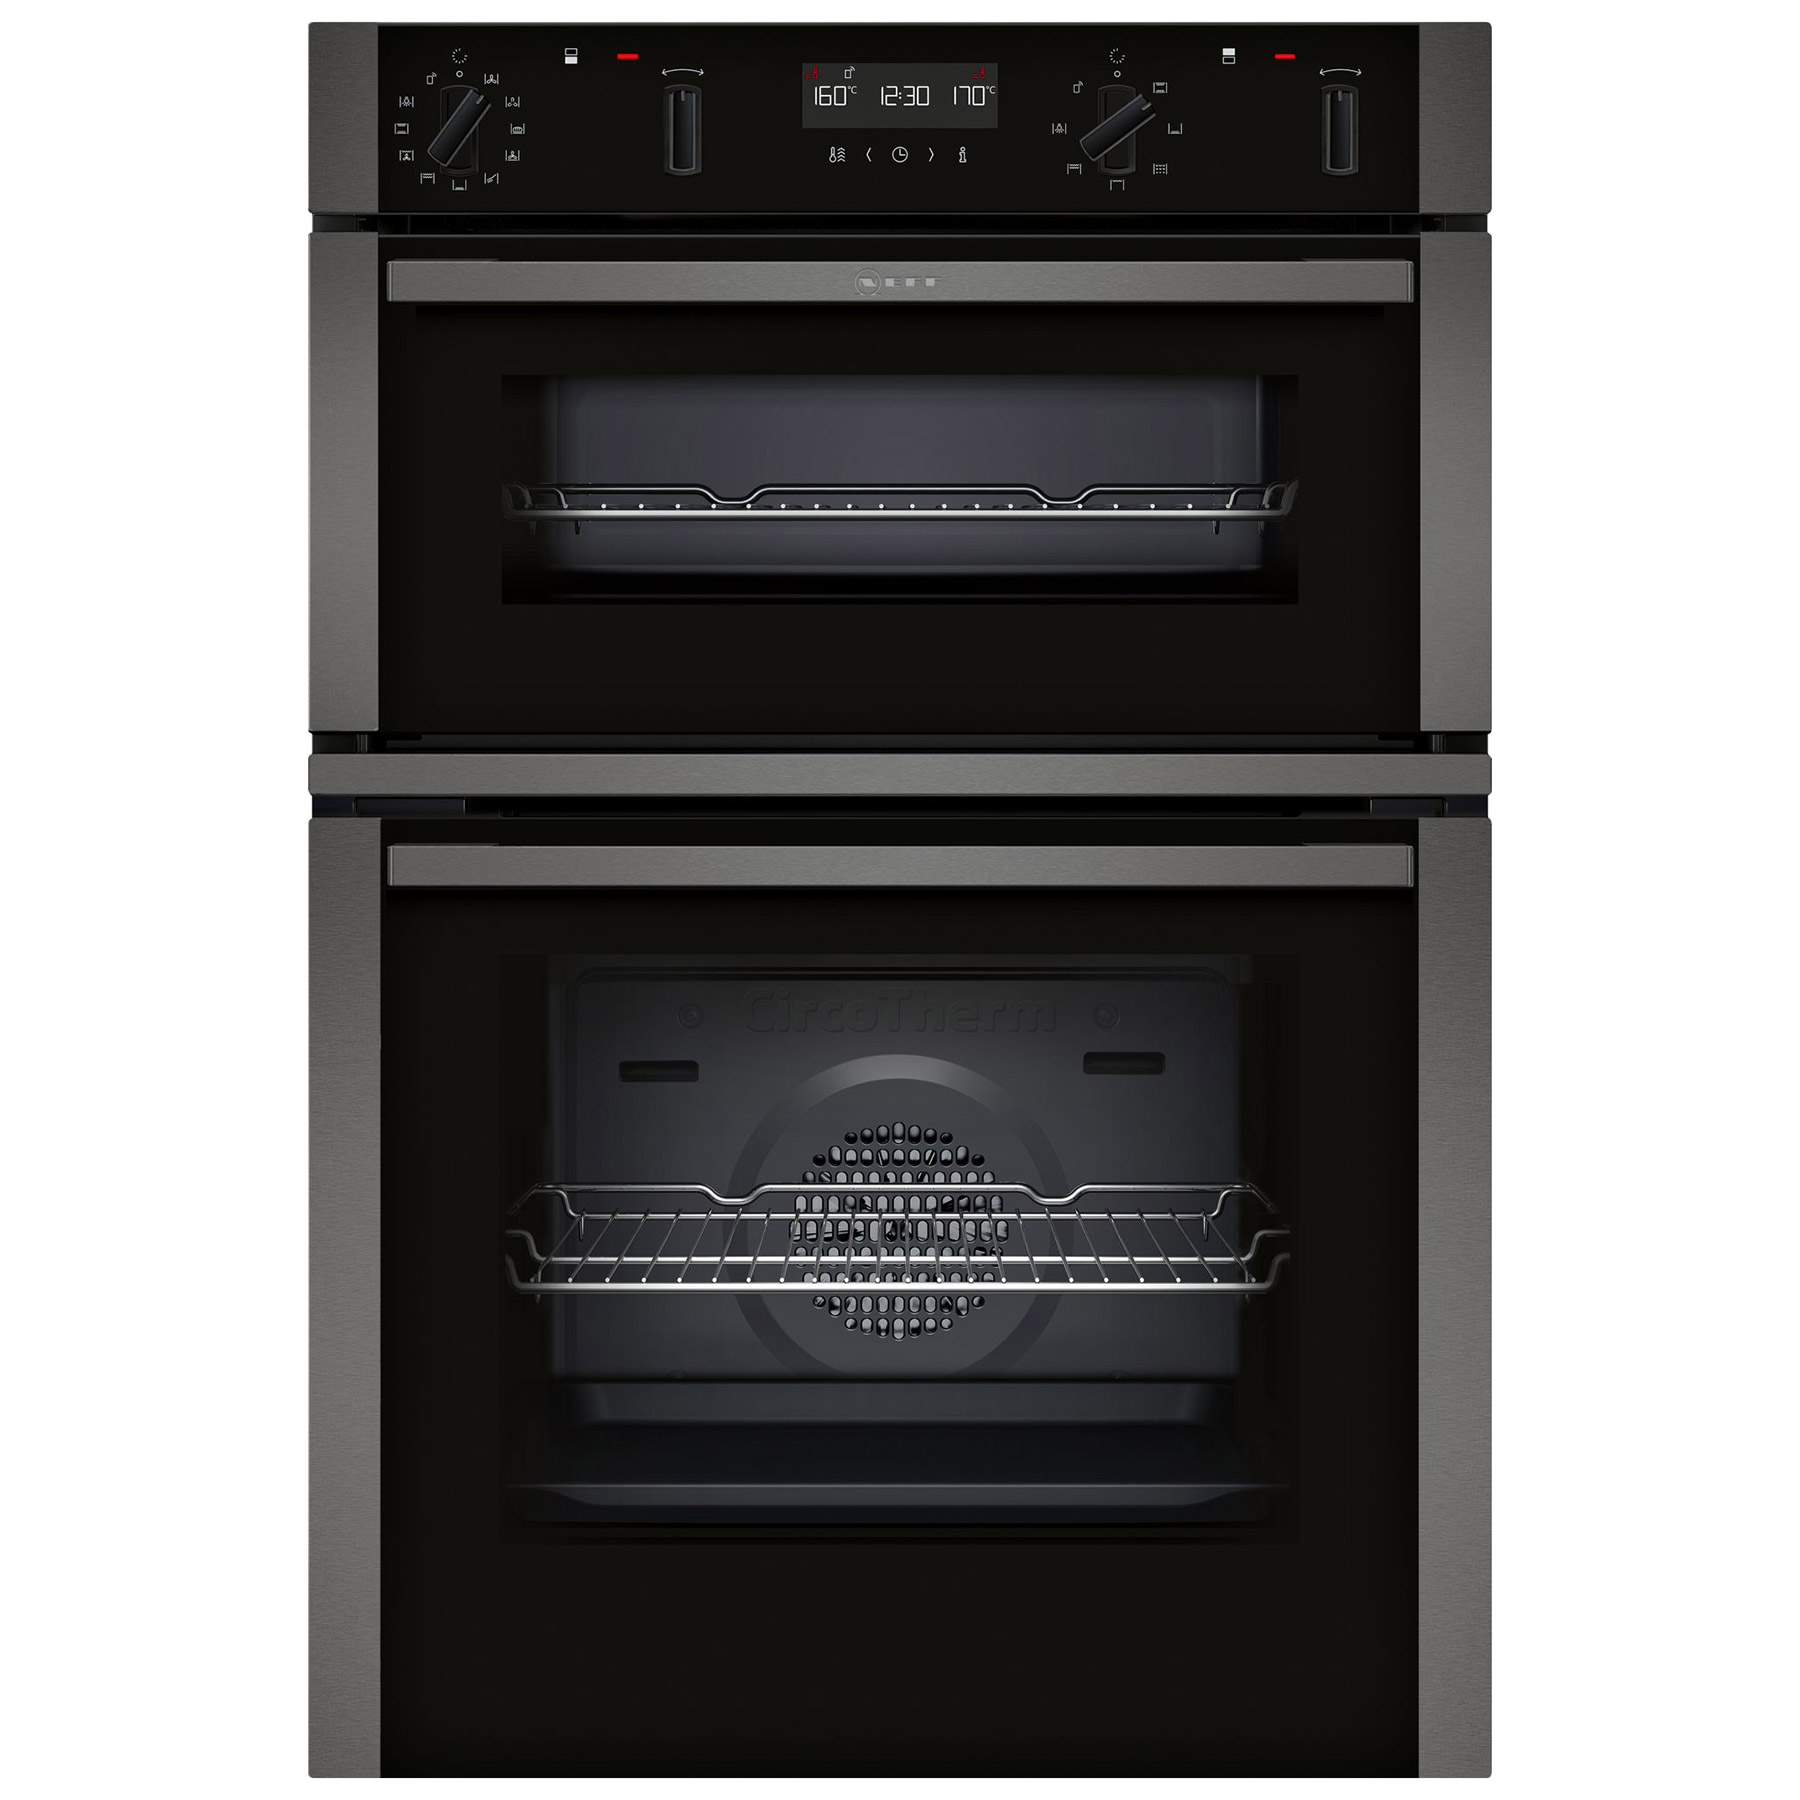 Image of Neff U2ACM7HG0B N50 Built In Pyrolytic Double Electric Oven in Black